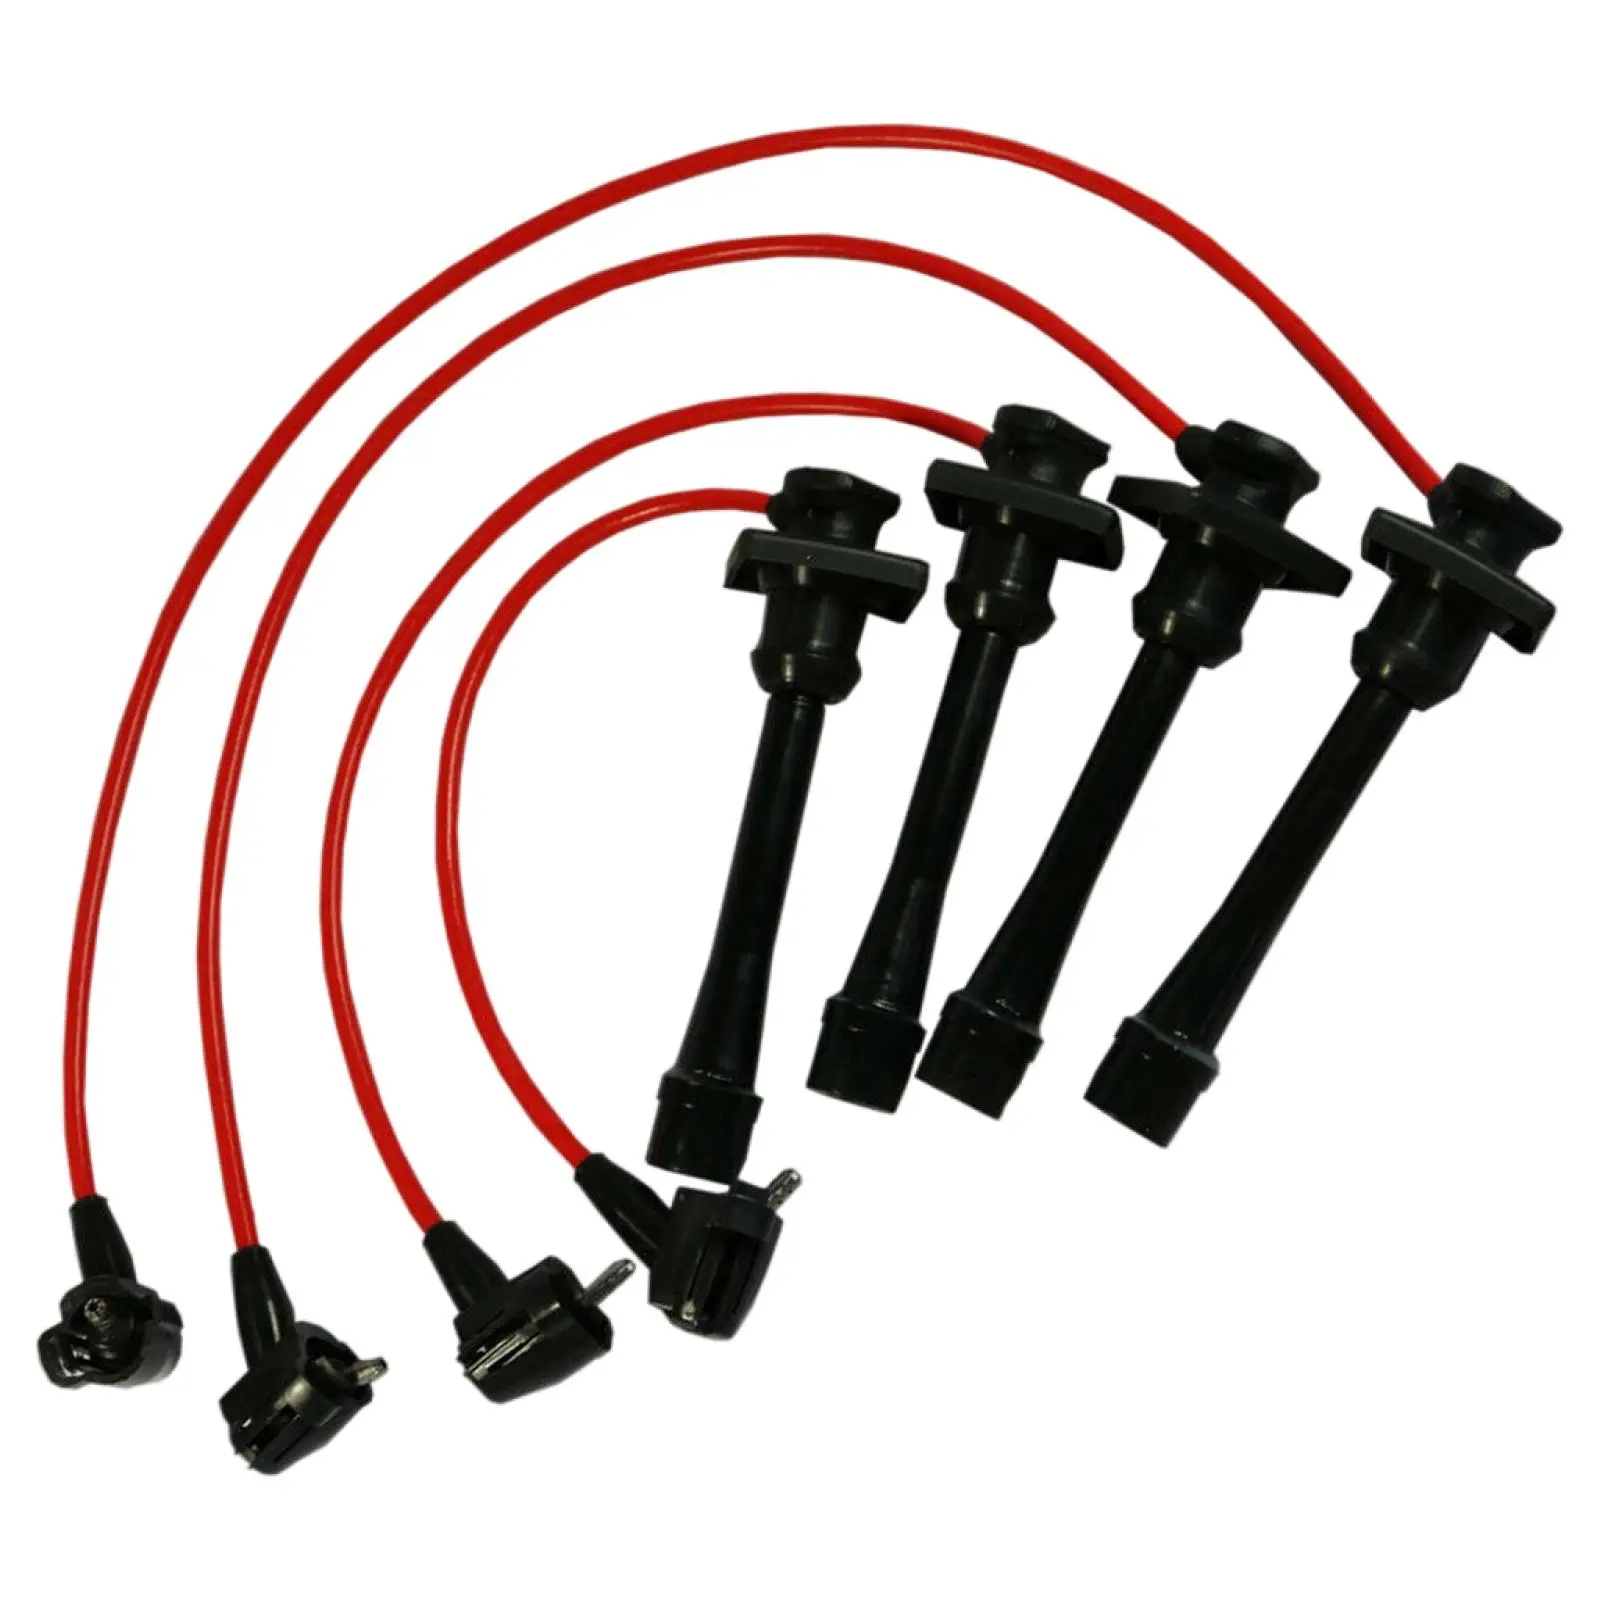 4x Spark Plug Wires 90919-22327 Ignition Cables for toyota for 93-97 Heavy Duty Silicone Boots 9091922327